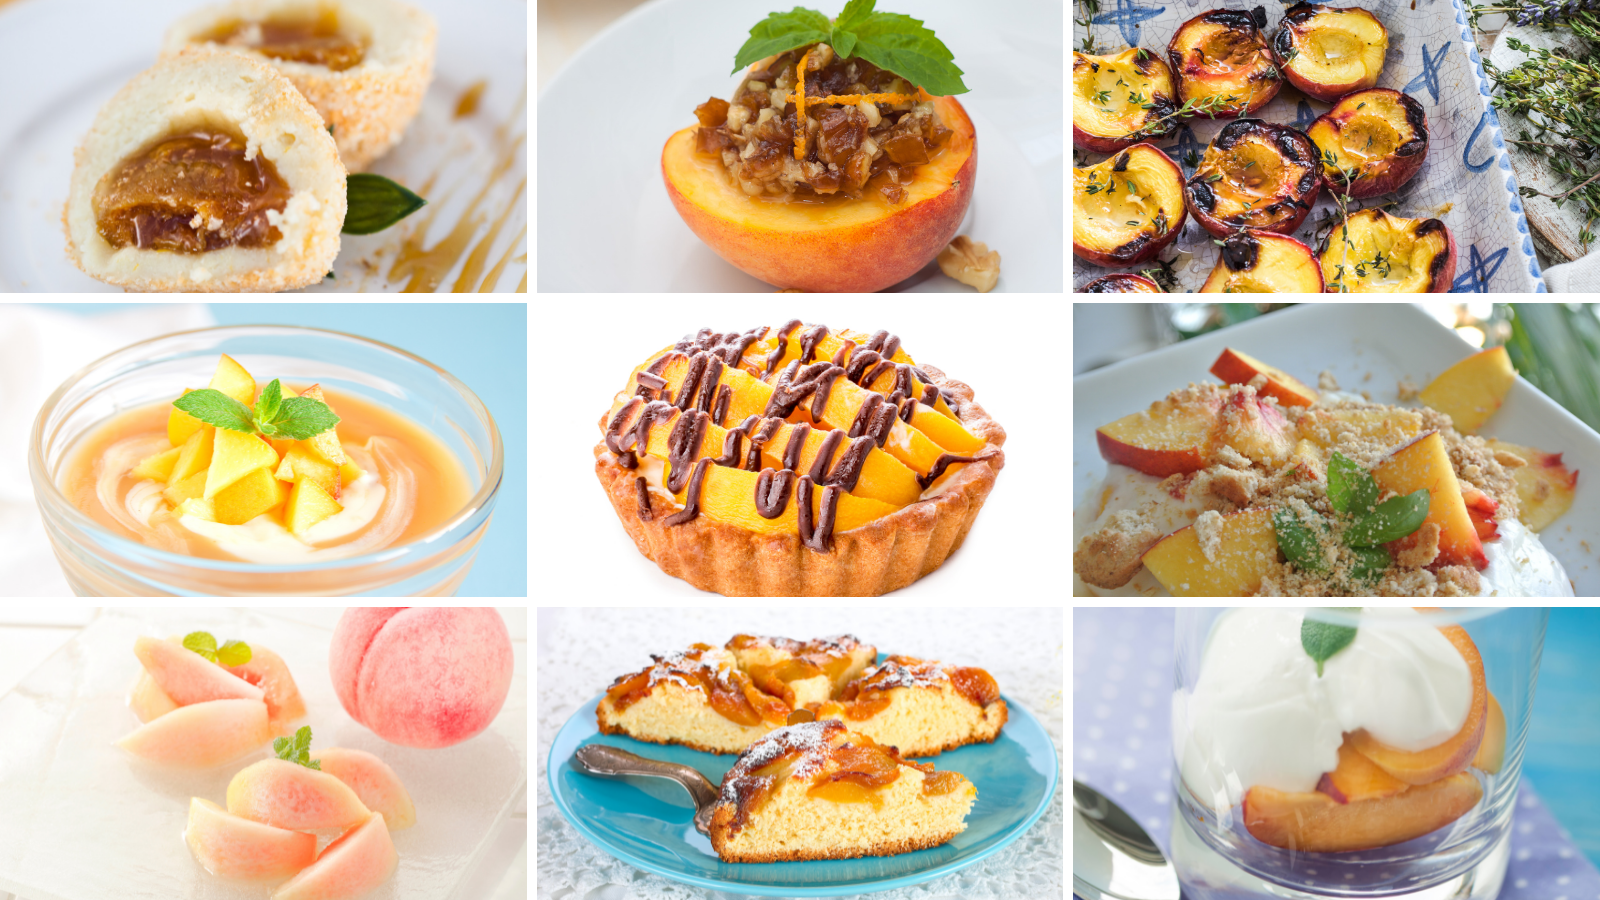 8 Amazing Plant-Based Peach Dessert Recipes For Your Kids